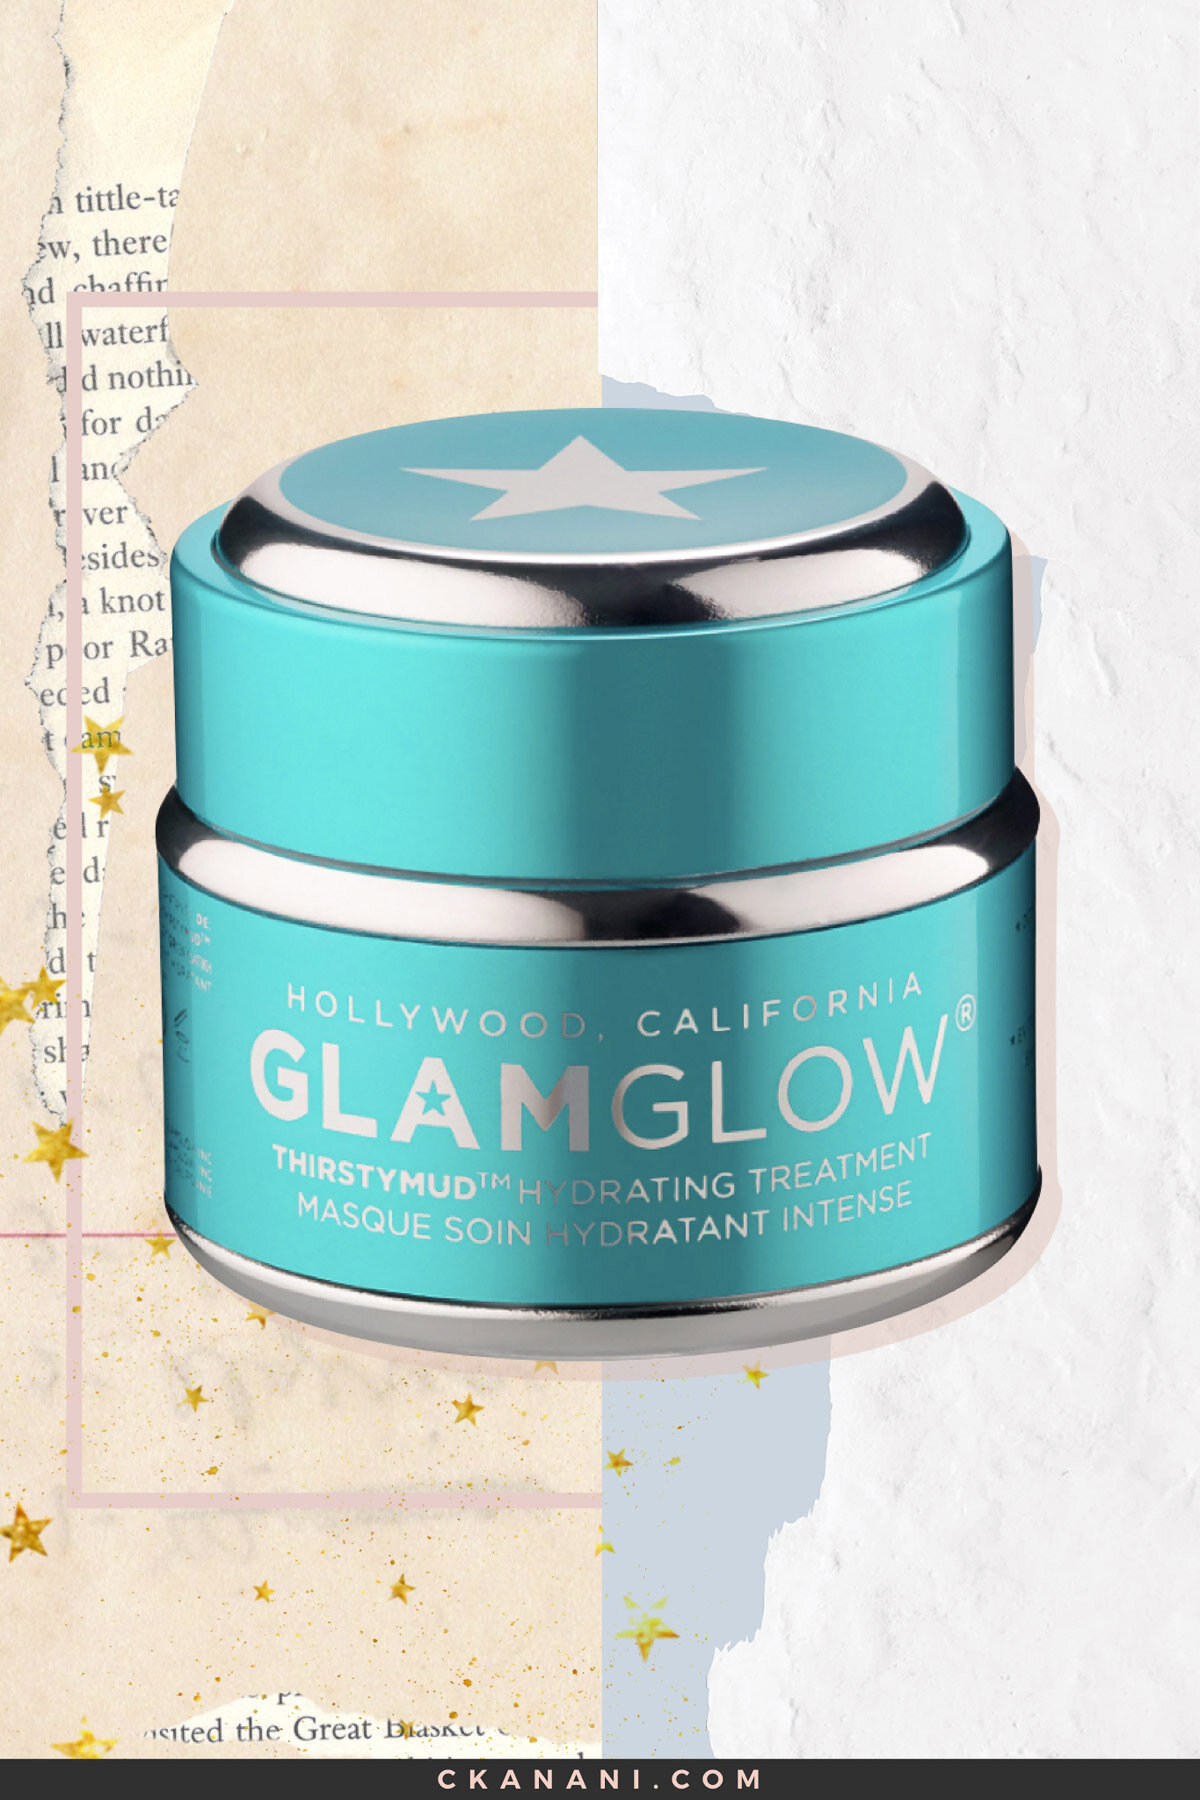 GLAMGLOW THIRSTYMUD™ Hydrating Treatment Mask: The Best Face Masks